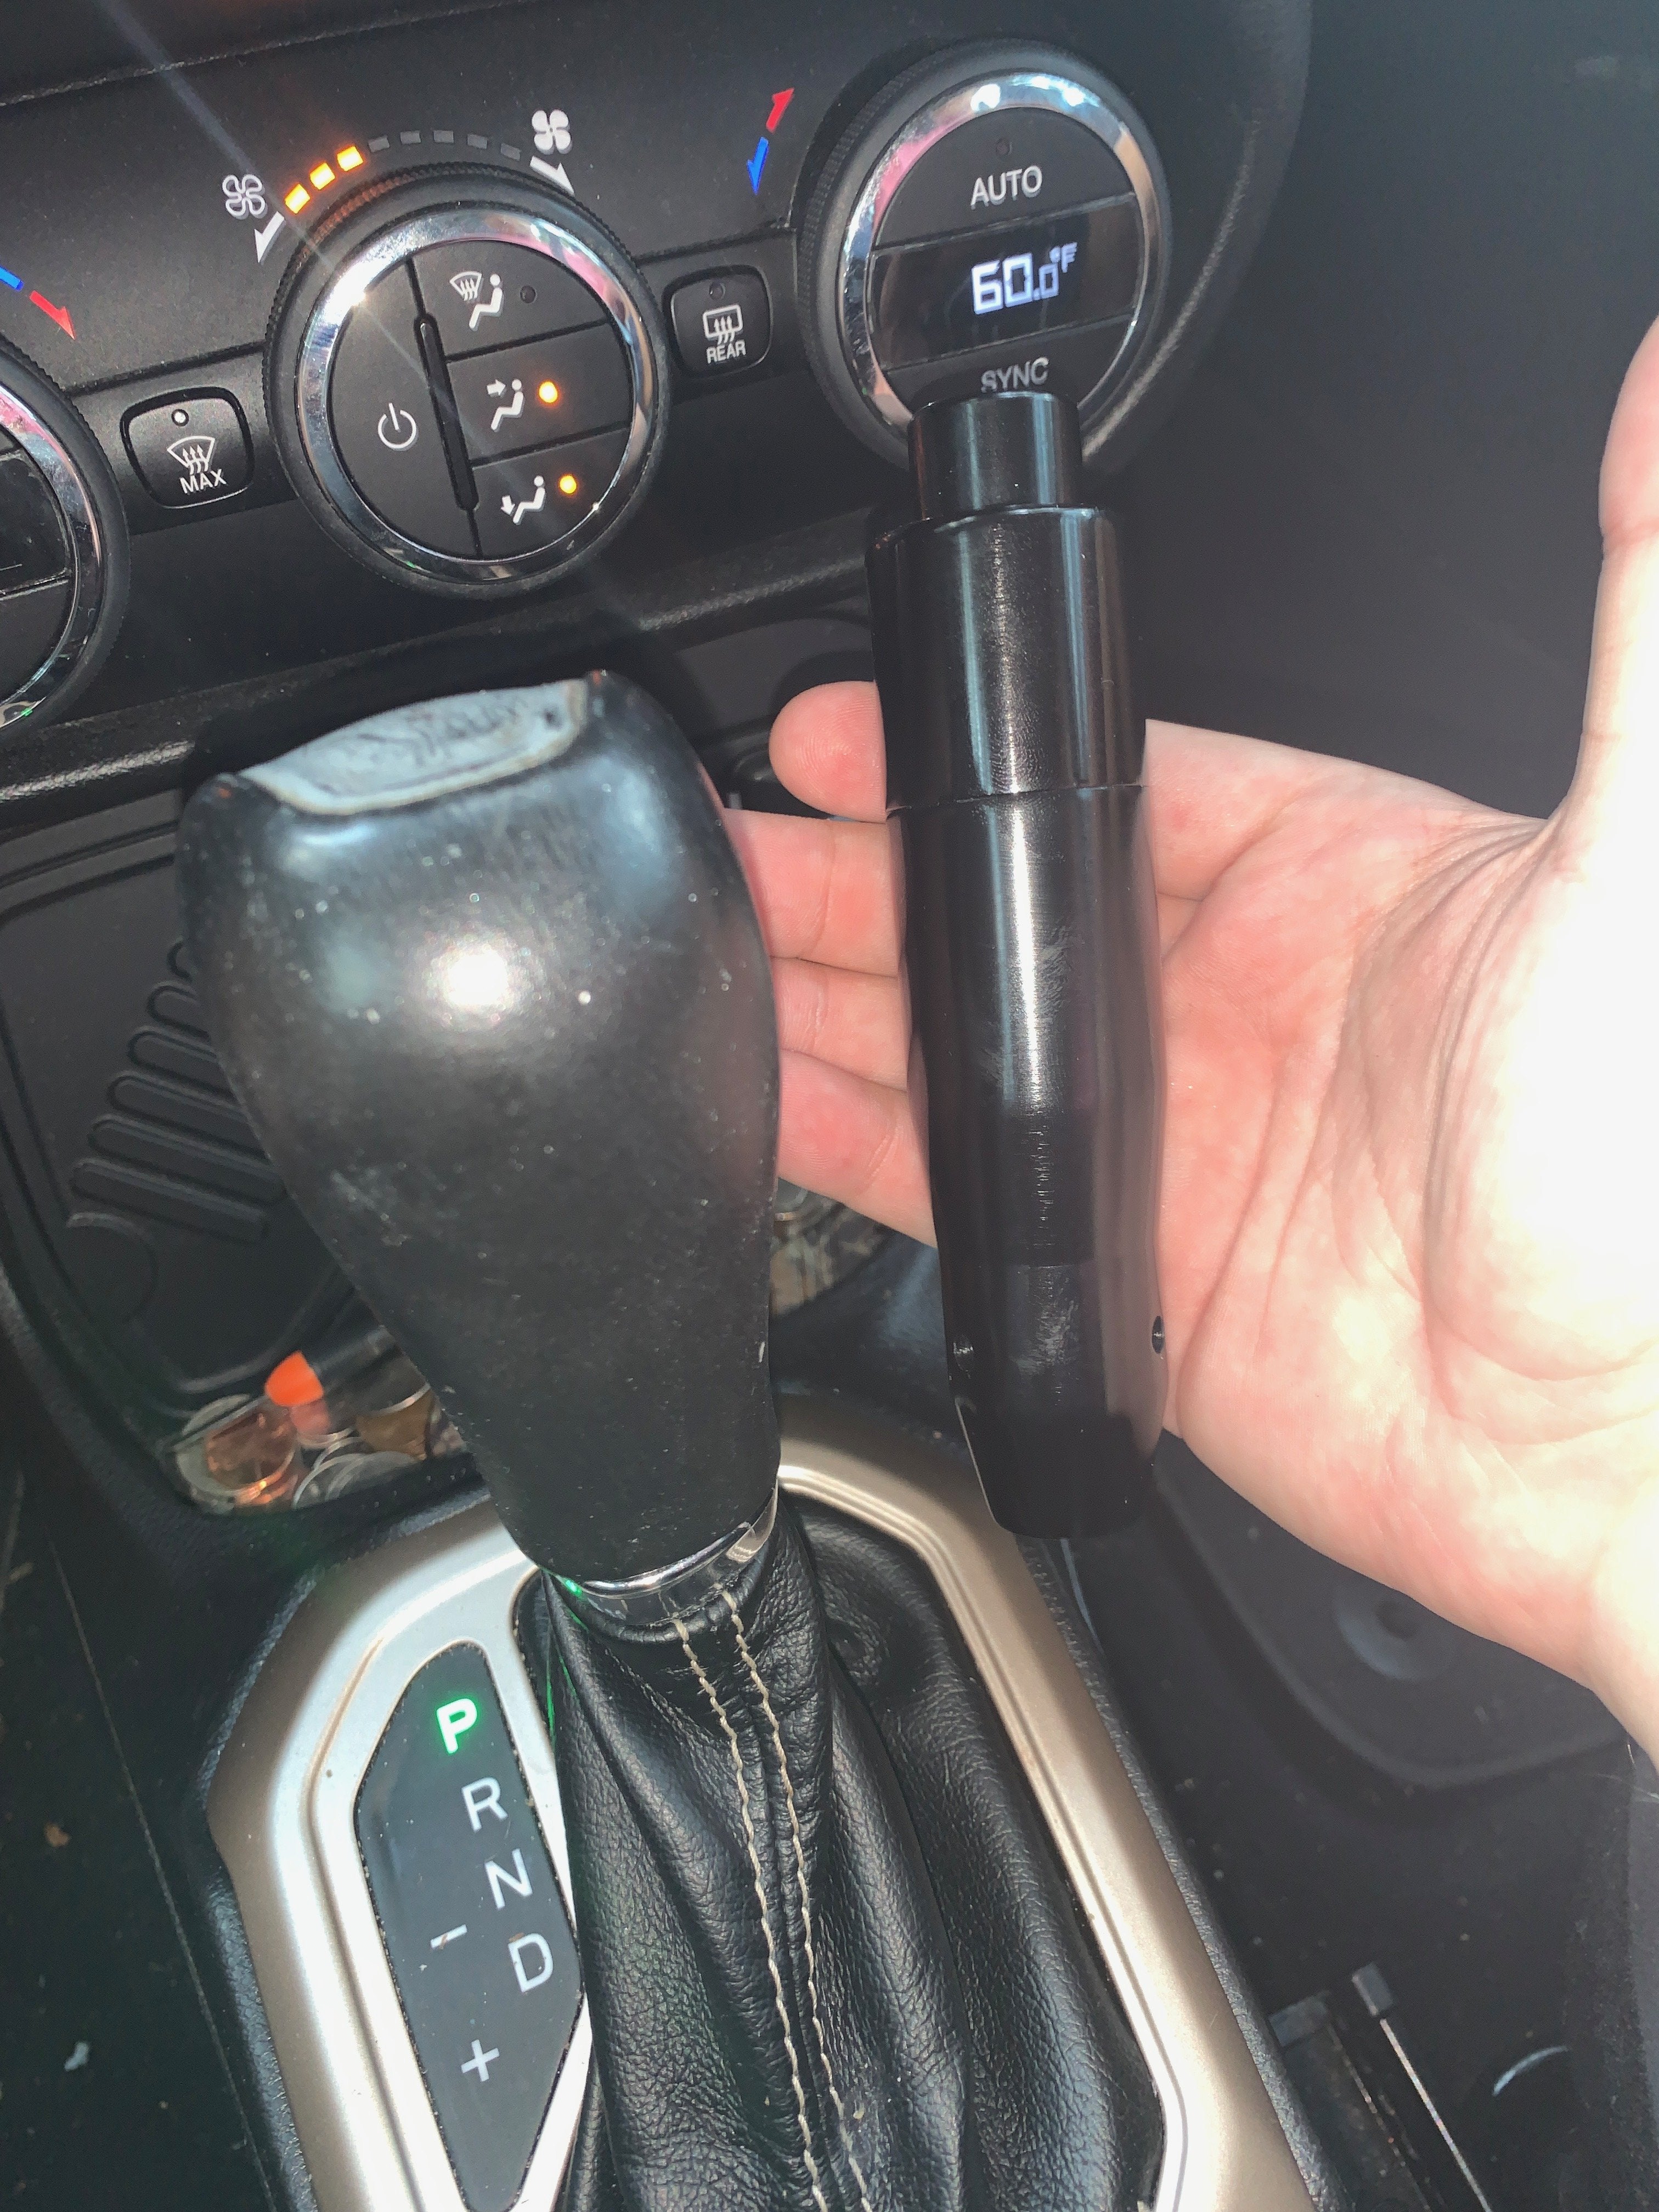 HELP ! 2016 Automatic Limited Jeep Renegade FWD - Wanting to Change shift  Knob | Jeep Renegade Forum